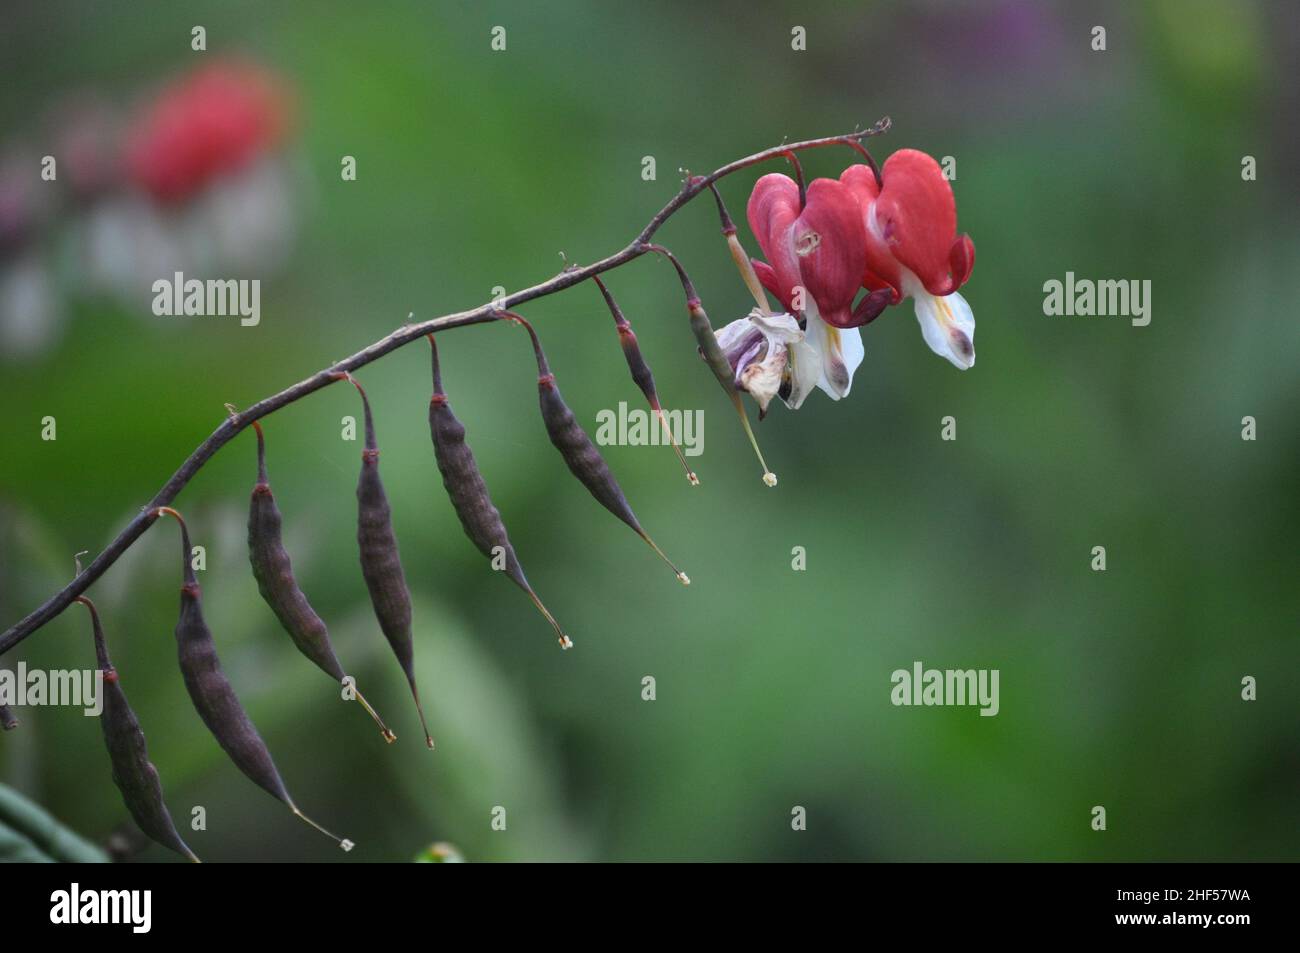 A stem of a red bleeding heart plant (Dicentra Formosa) showing formed seed pods and two remaining hearts at the end of the stem. Stock Photo